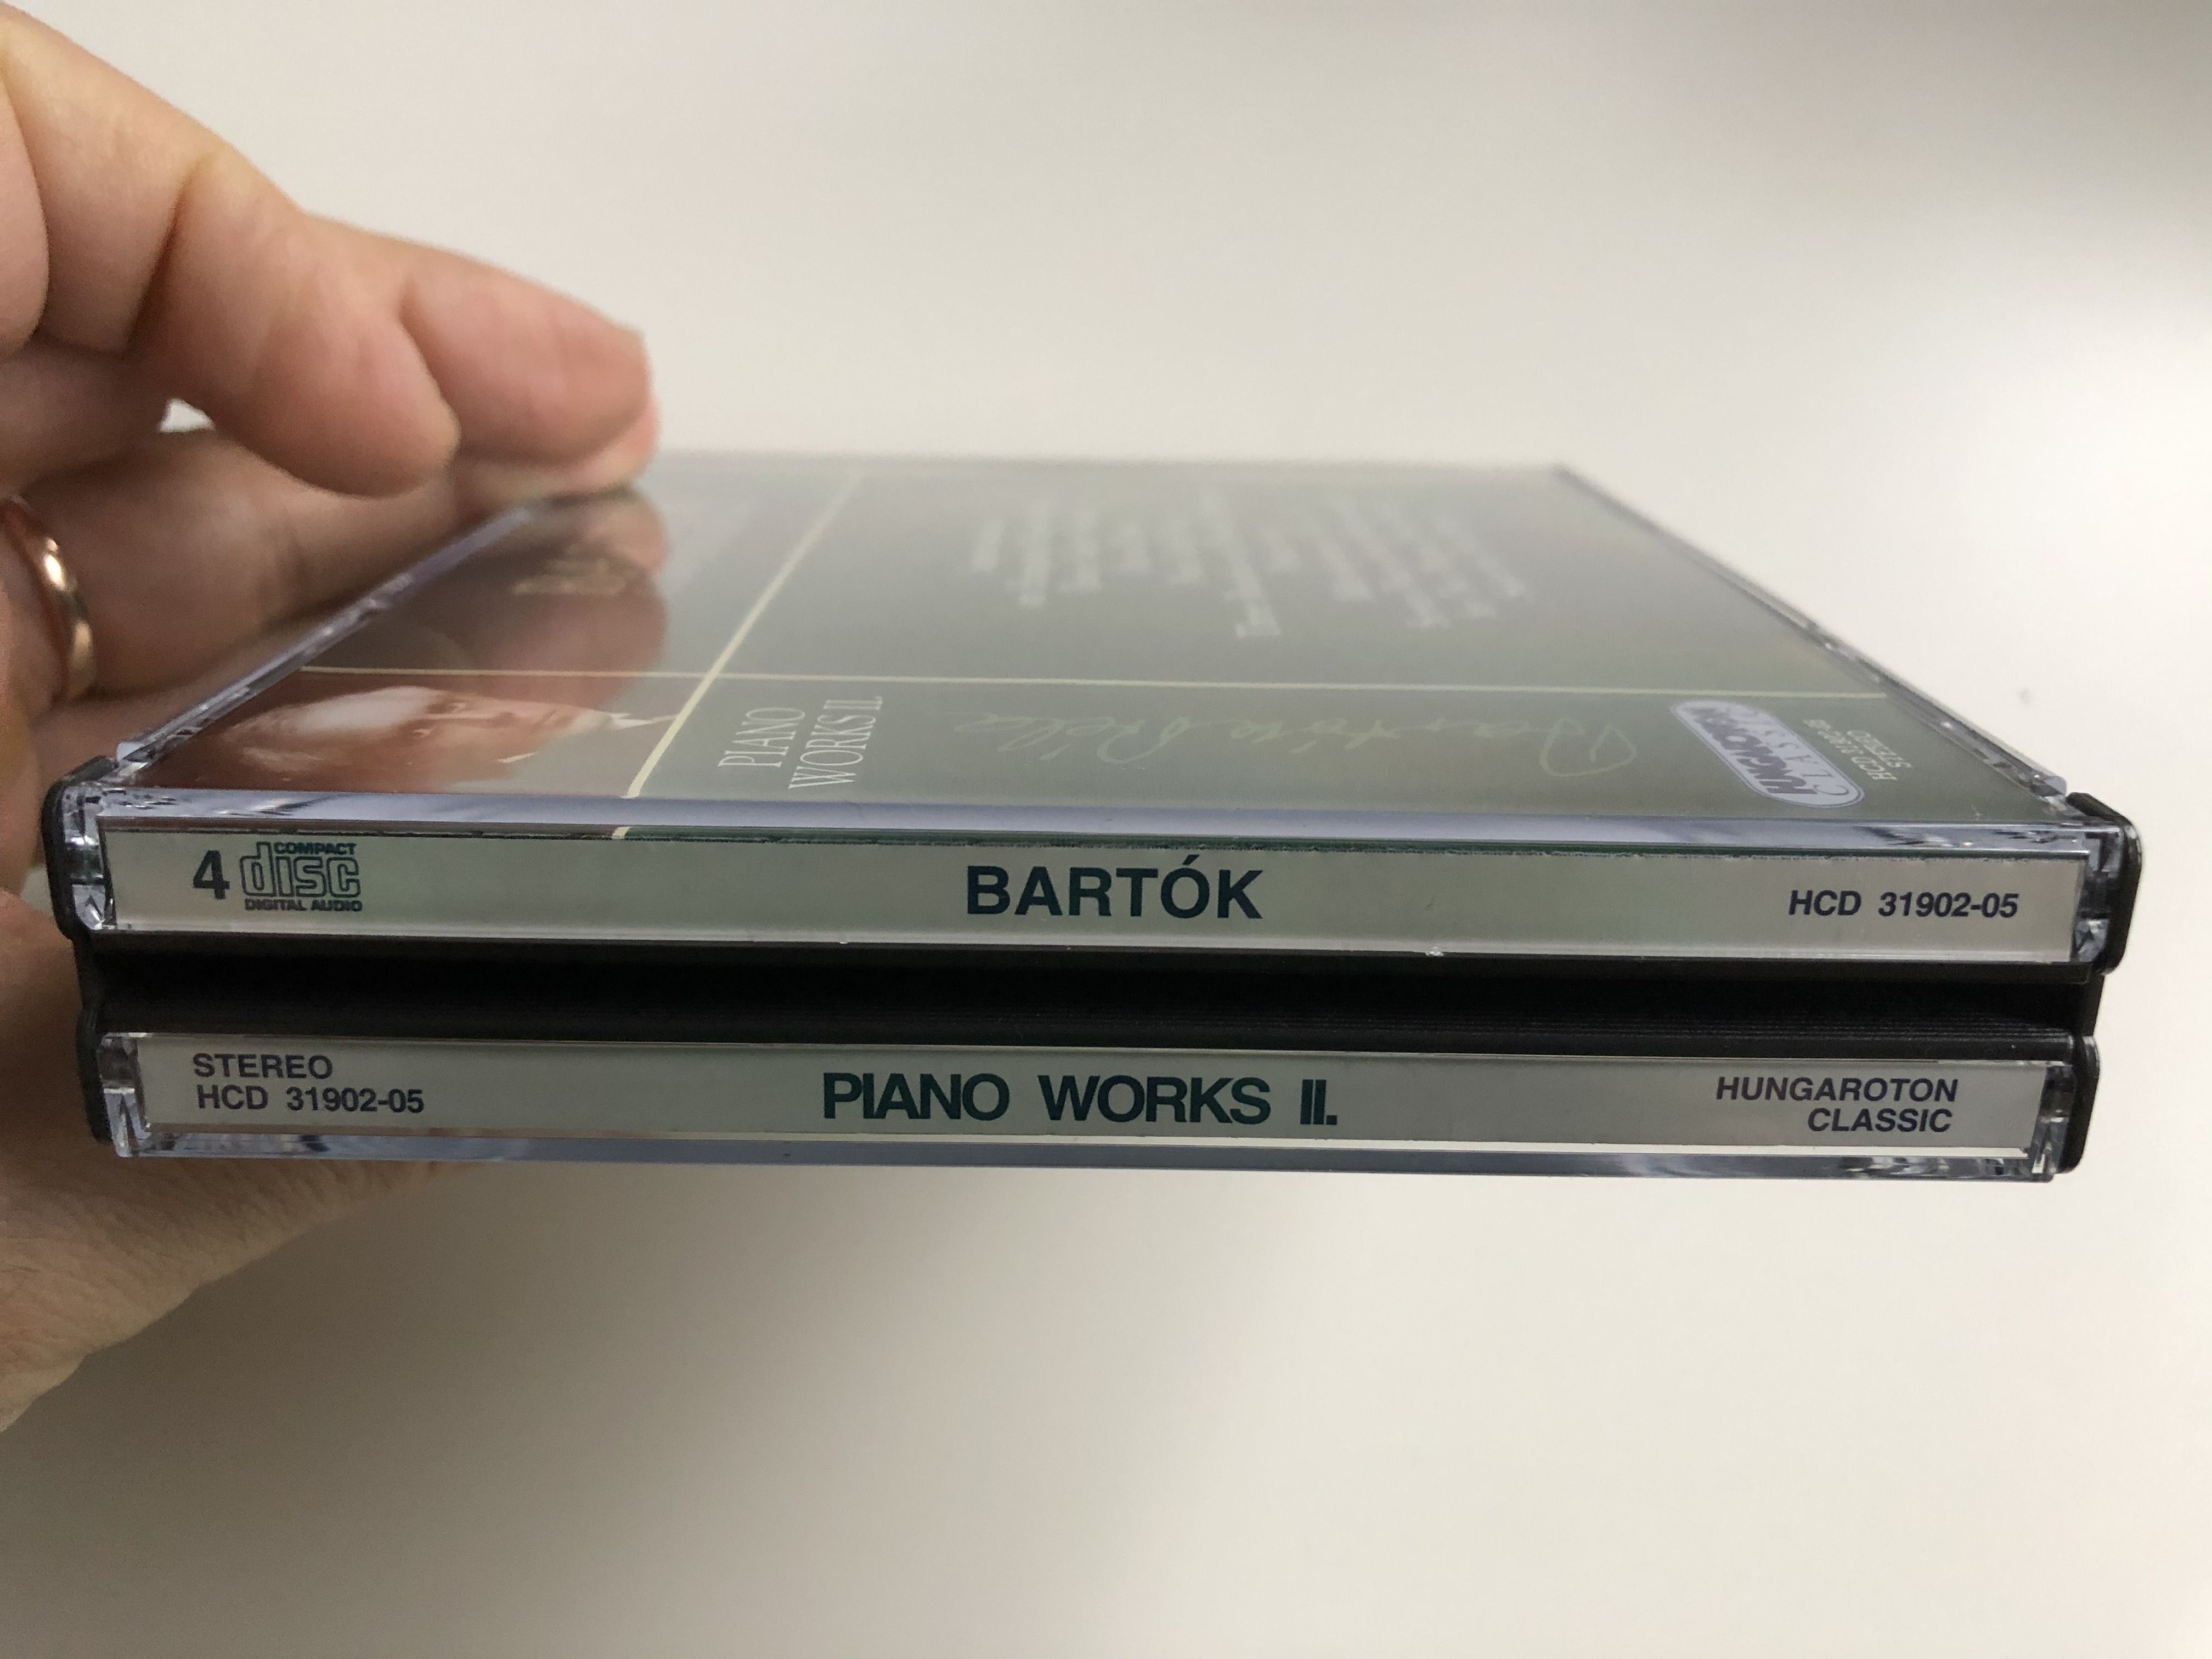 bartok-complete-edition-piano-works-ii.-improvisations-of-hungarian-peasant-songs-dance-suit-sonata-out-of-doors-nine-little-pieces-three-rondos-on-slovak-folktunes-hungaroton-classic-14-.jpg